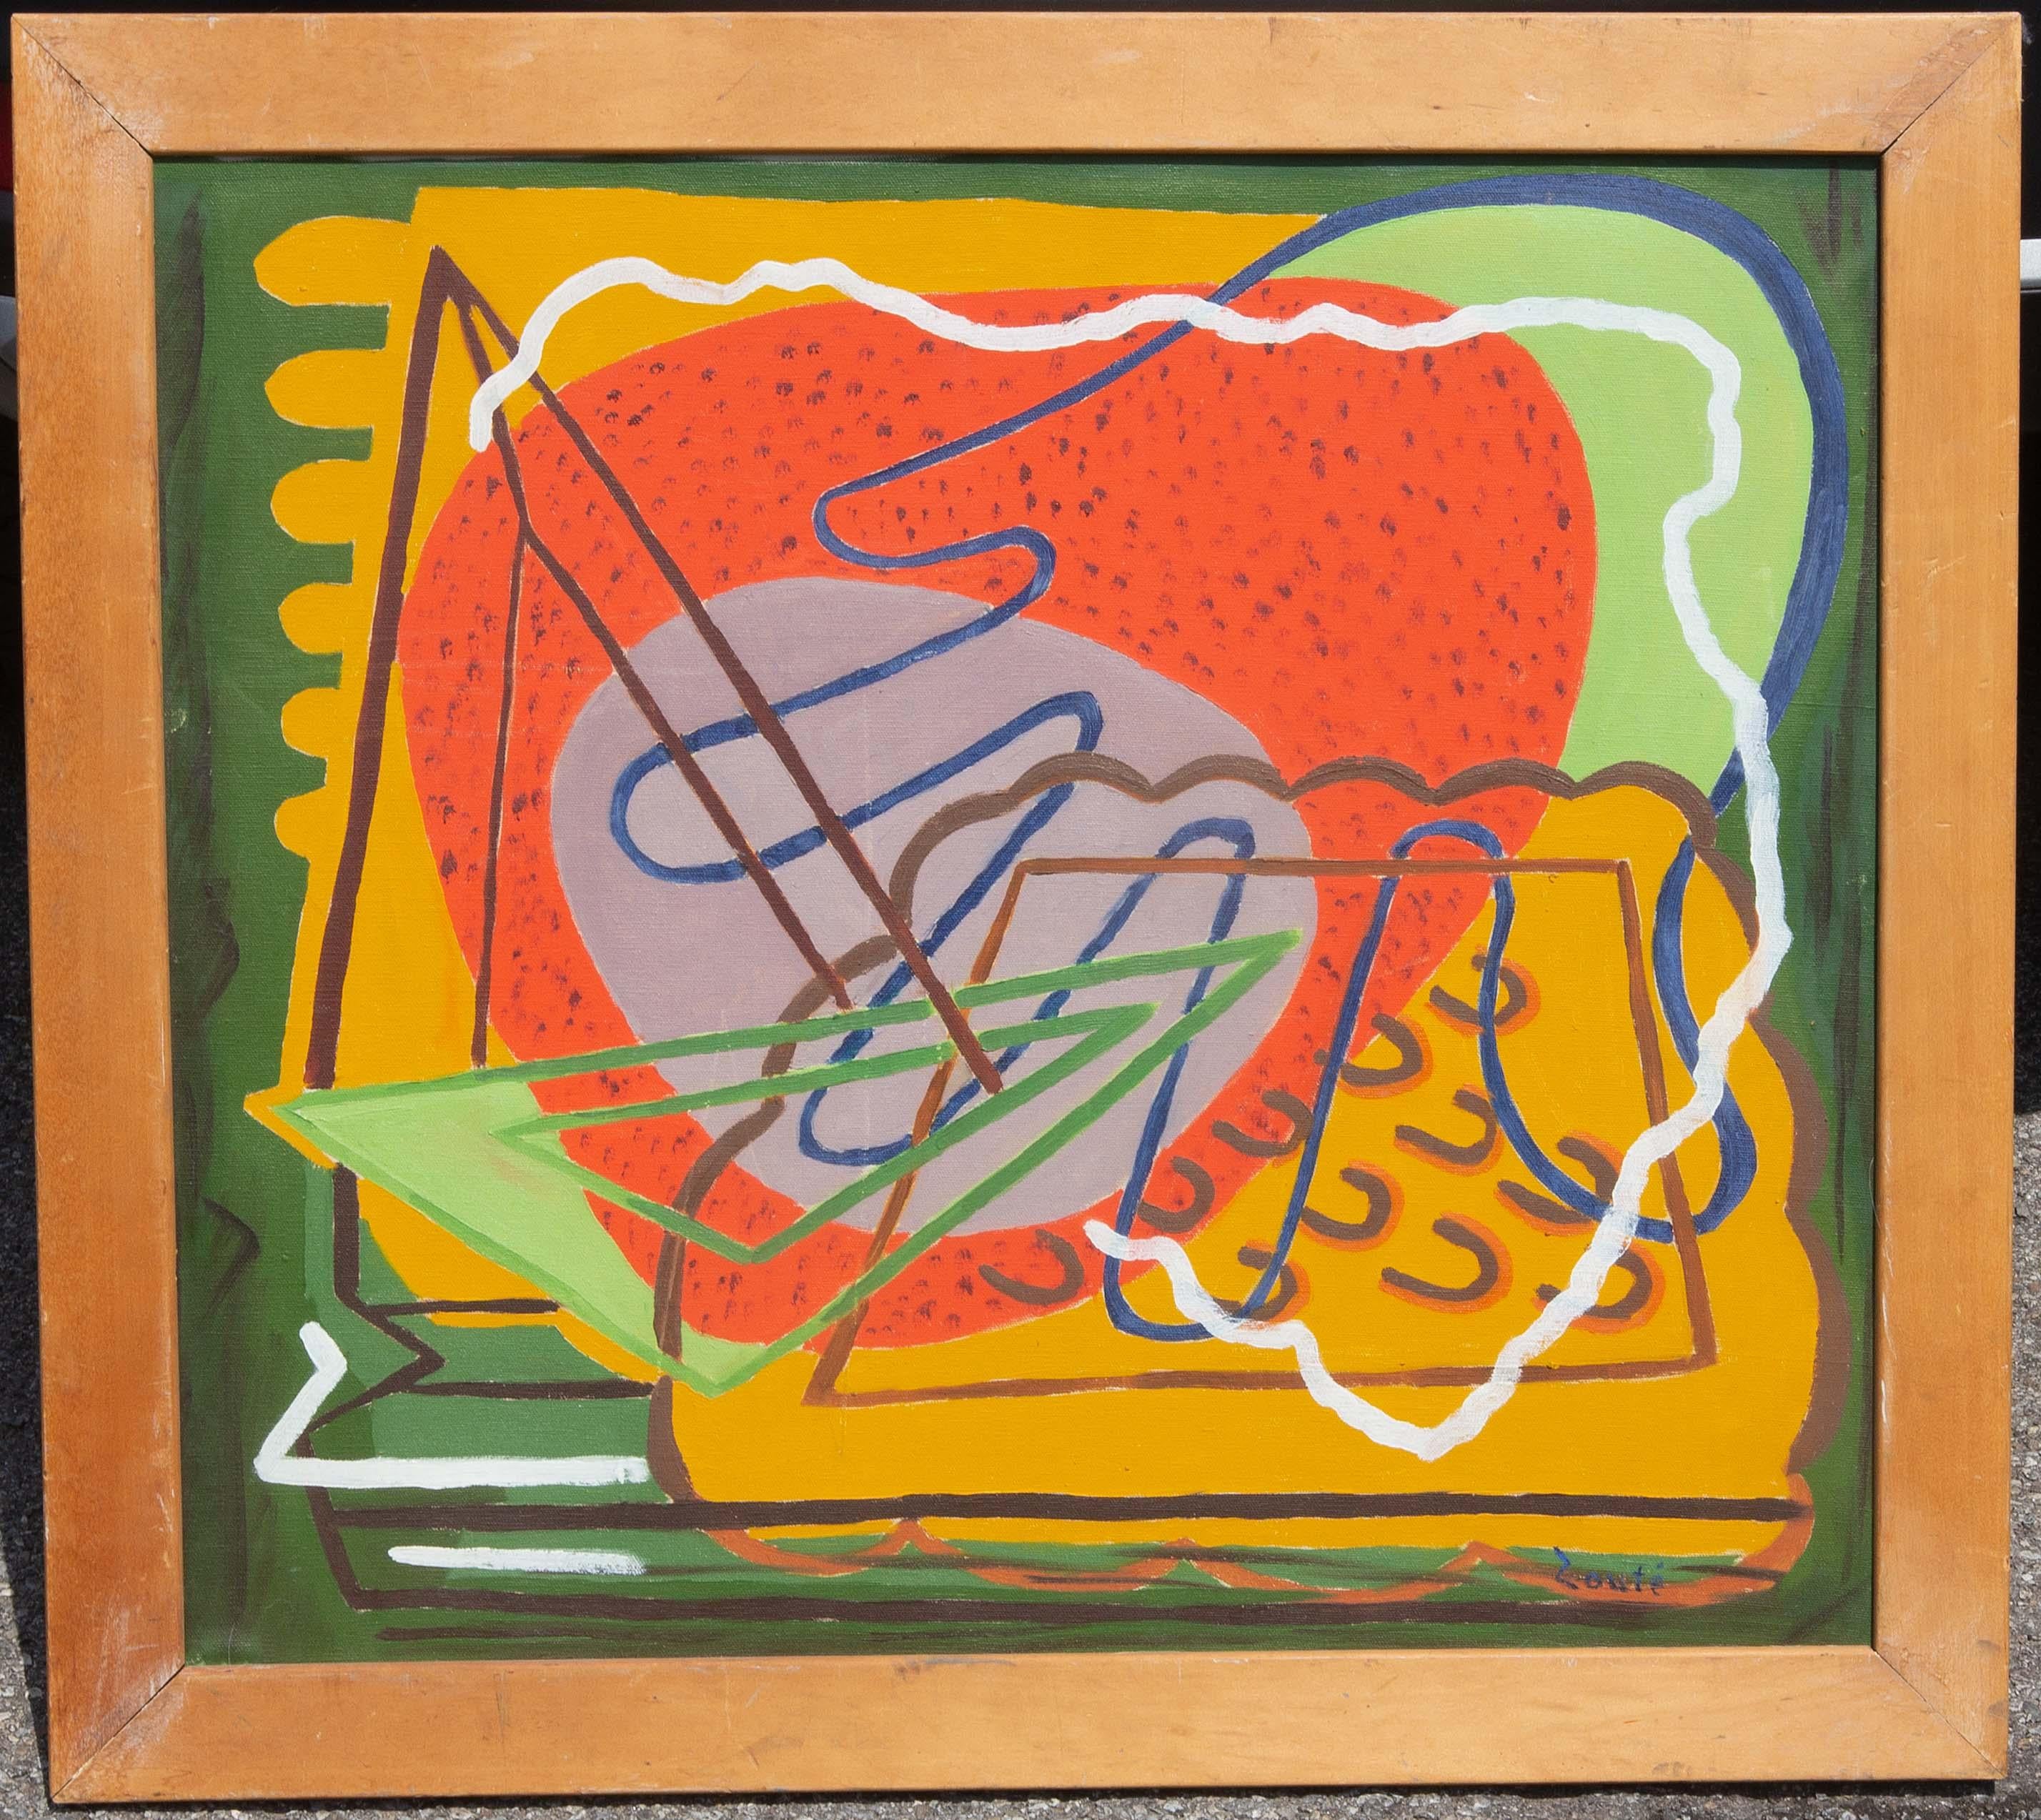 Abstract Modernist oil painting by Zoute. Oil on canvas mounted on board.  Painted in circa 1940's. 
Zoute (Born-Leon Salter, 1903-1976) was self-taught and well exhibited during his lifetime. He painted from 1940-1954 (he stopped painting at this